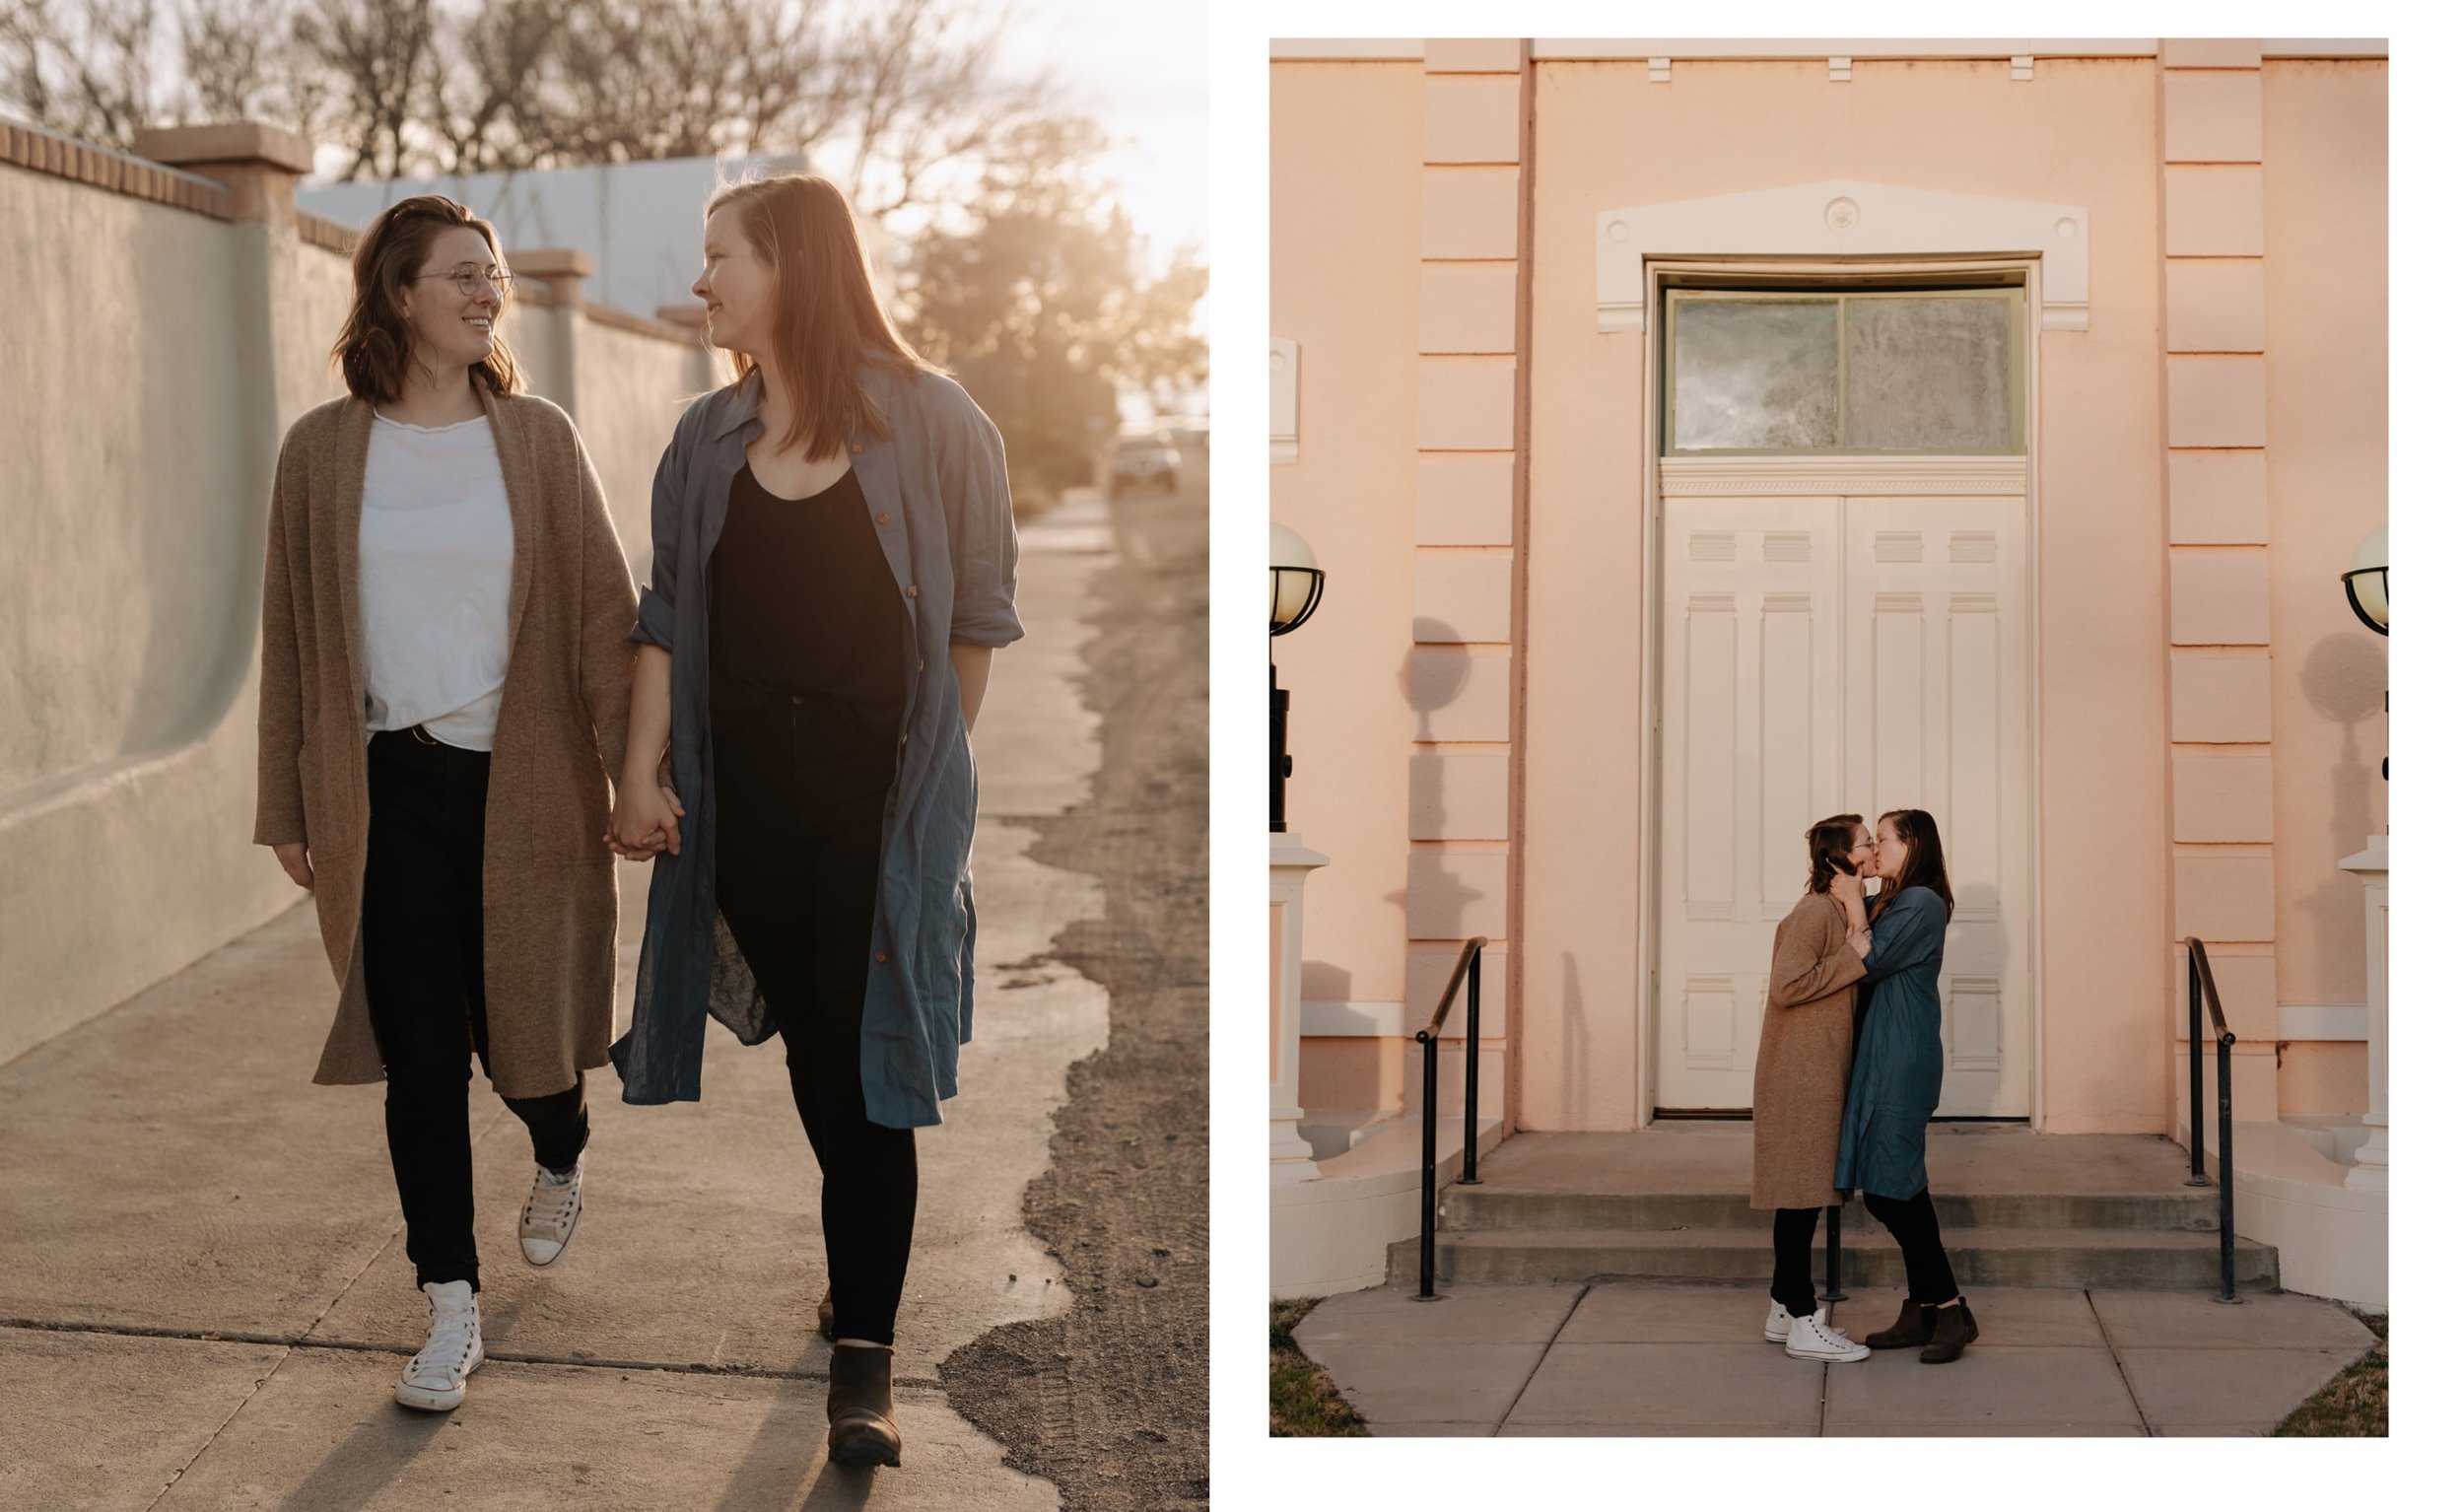 A couple smiles at each other while walking hand-in-hand during a golden hour photoshoot in Marfa, Texas.